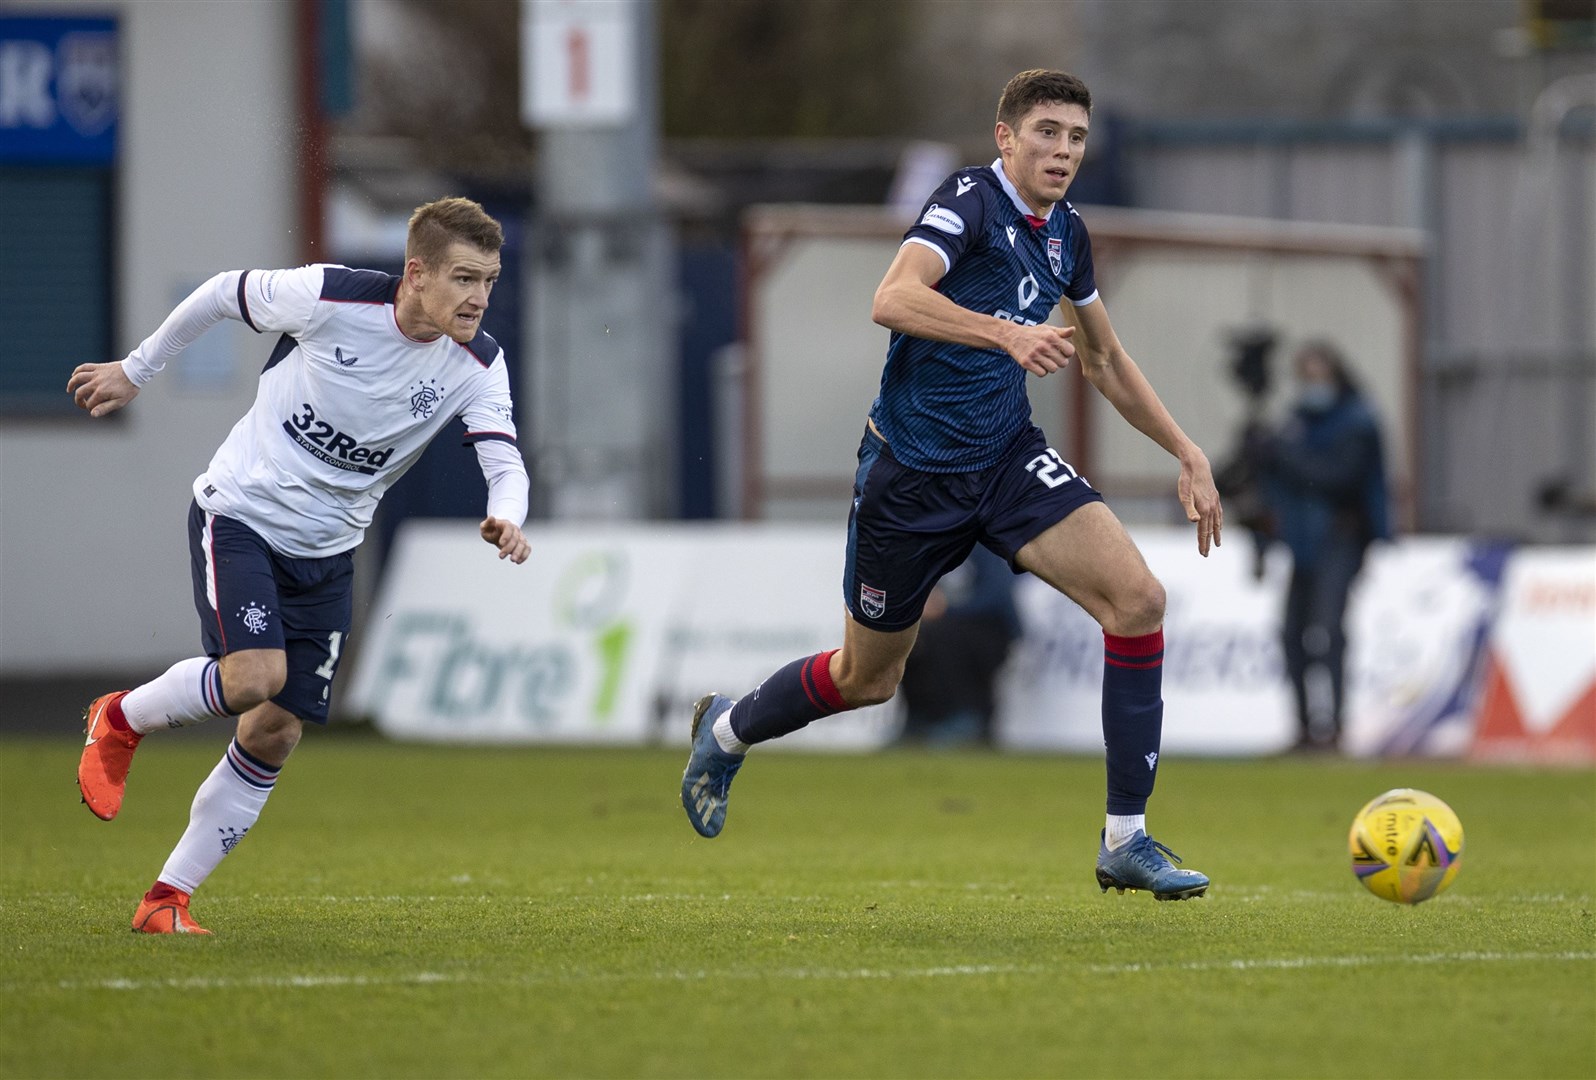 The Staggies will be counting on Ross Stewart to recapture last season's form as he returns from injury.